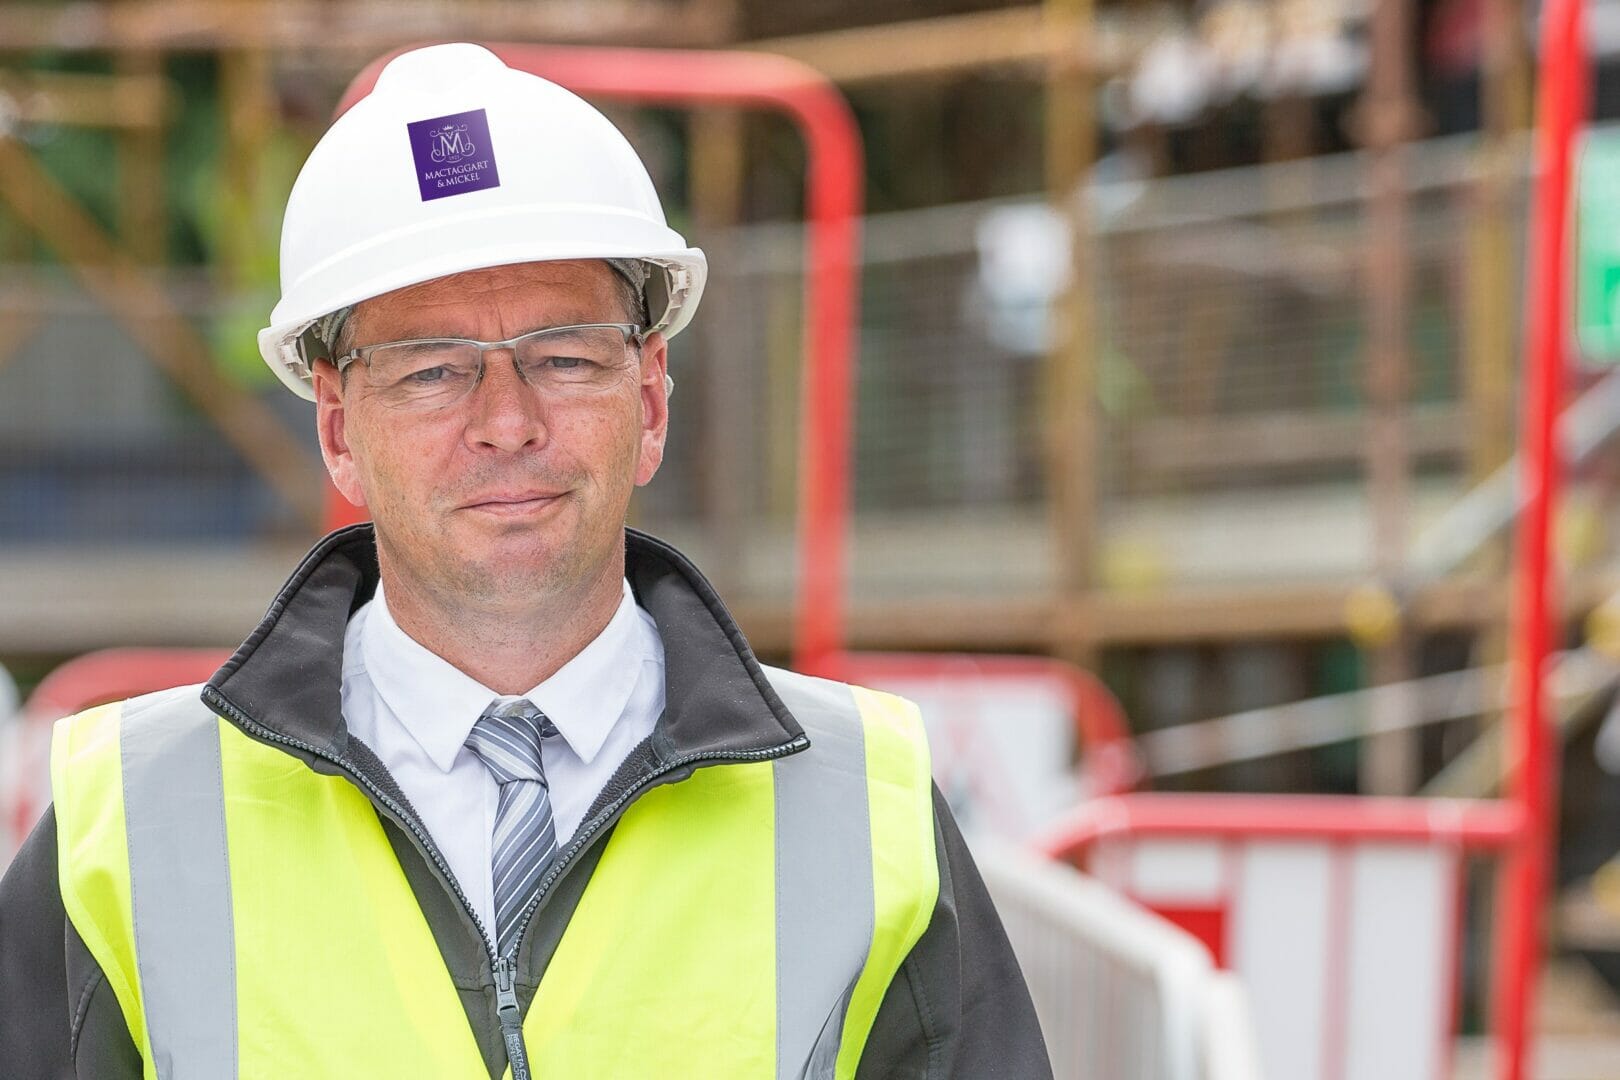 Site manager scoops Seal of Excellence for family housebuilder